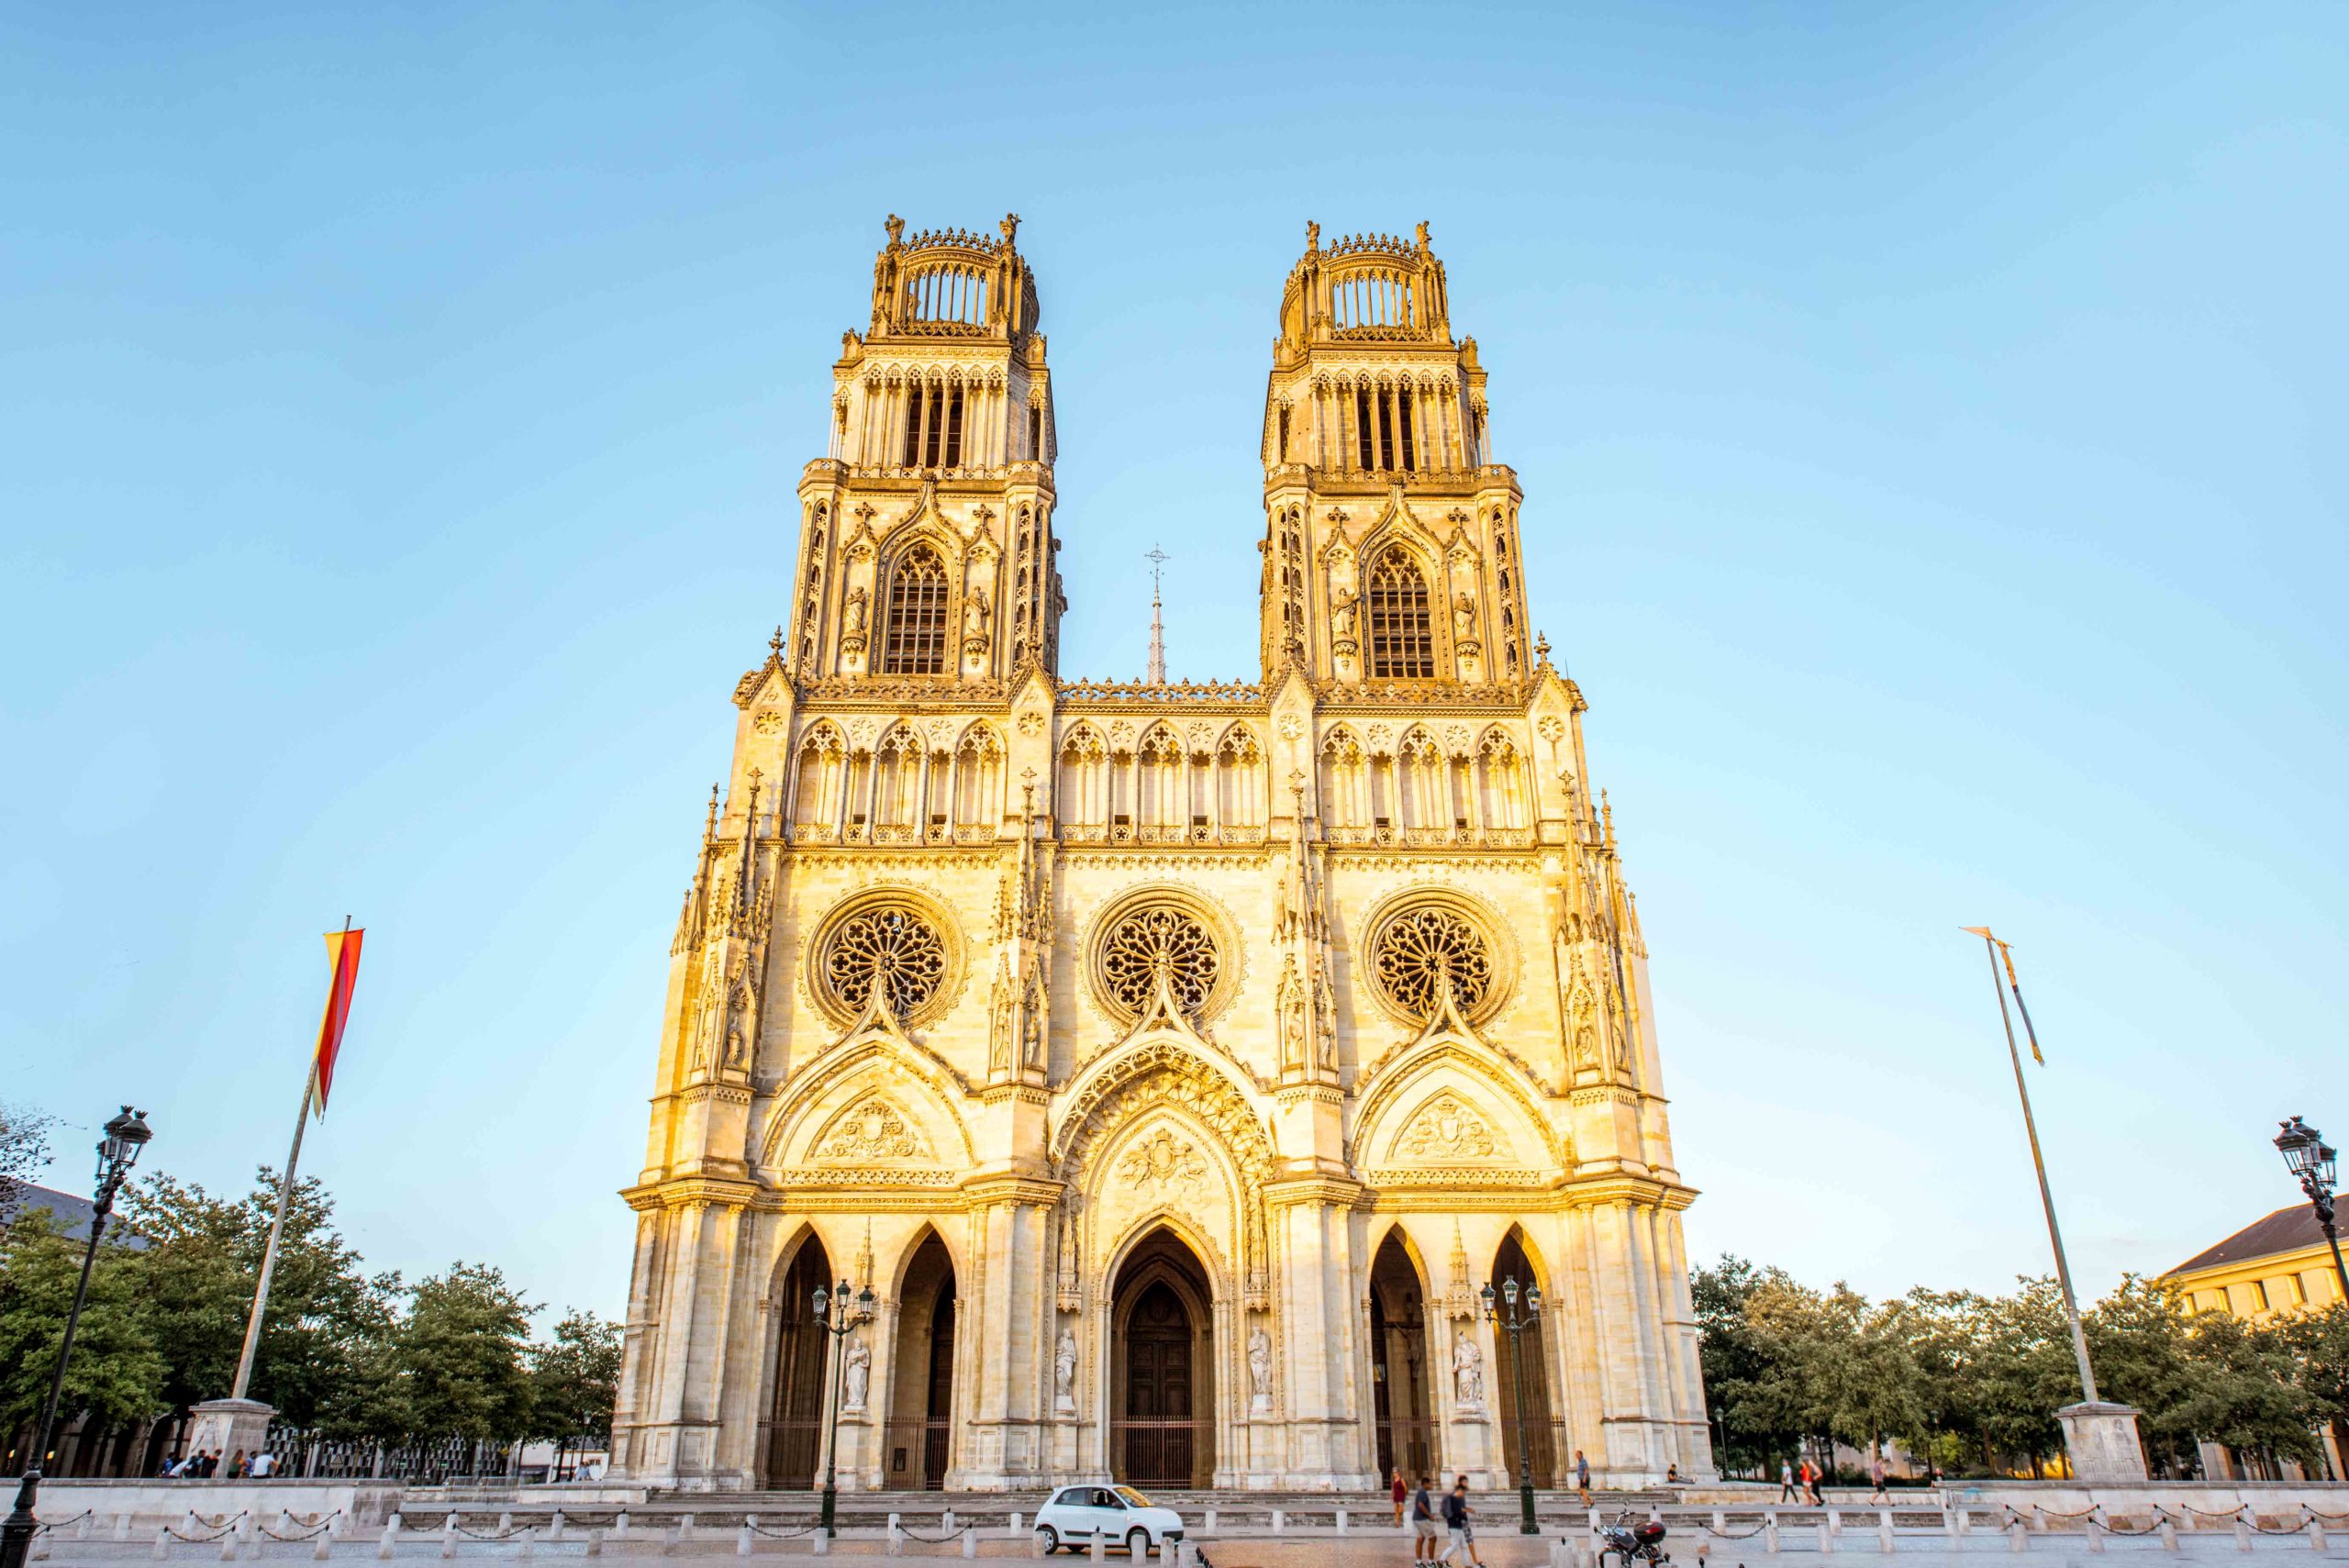 Orleans Cathedral. Photo RossHelen via Envato Elements